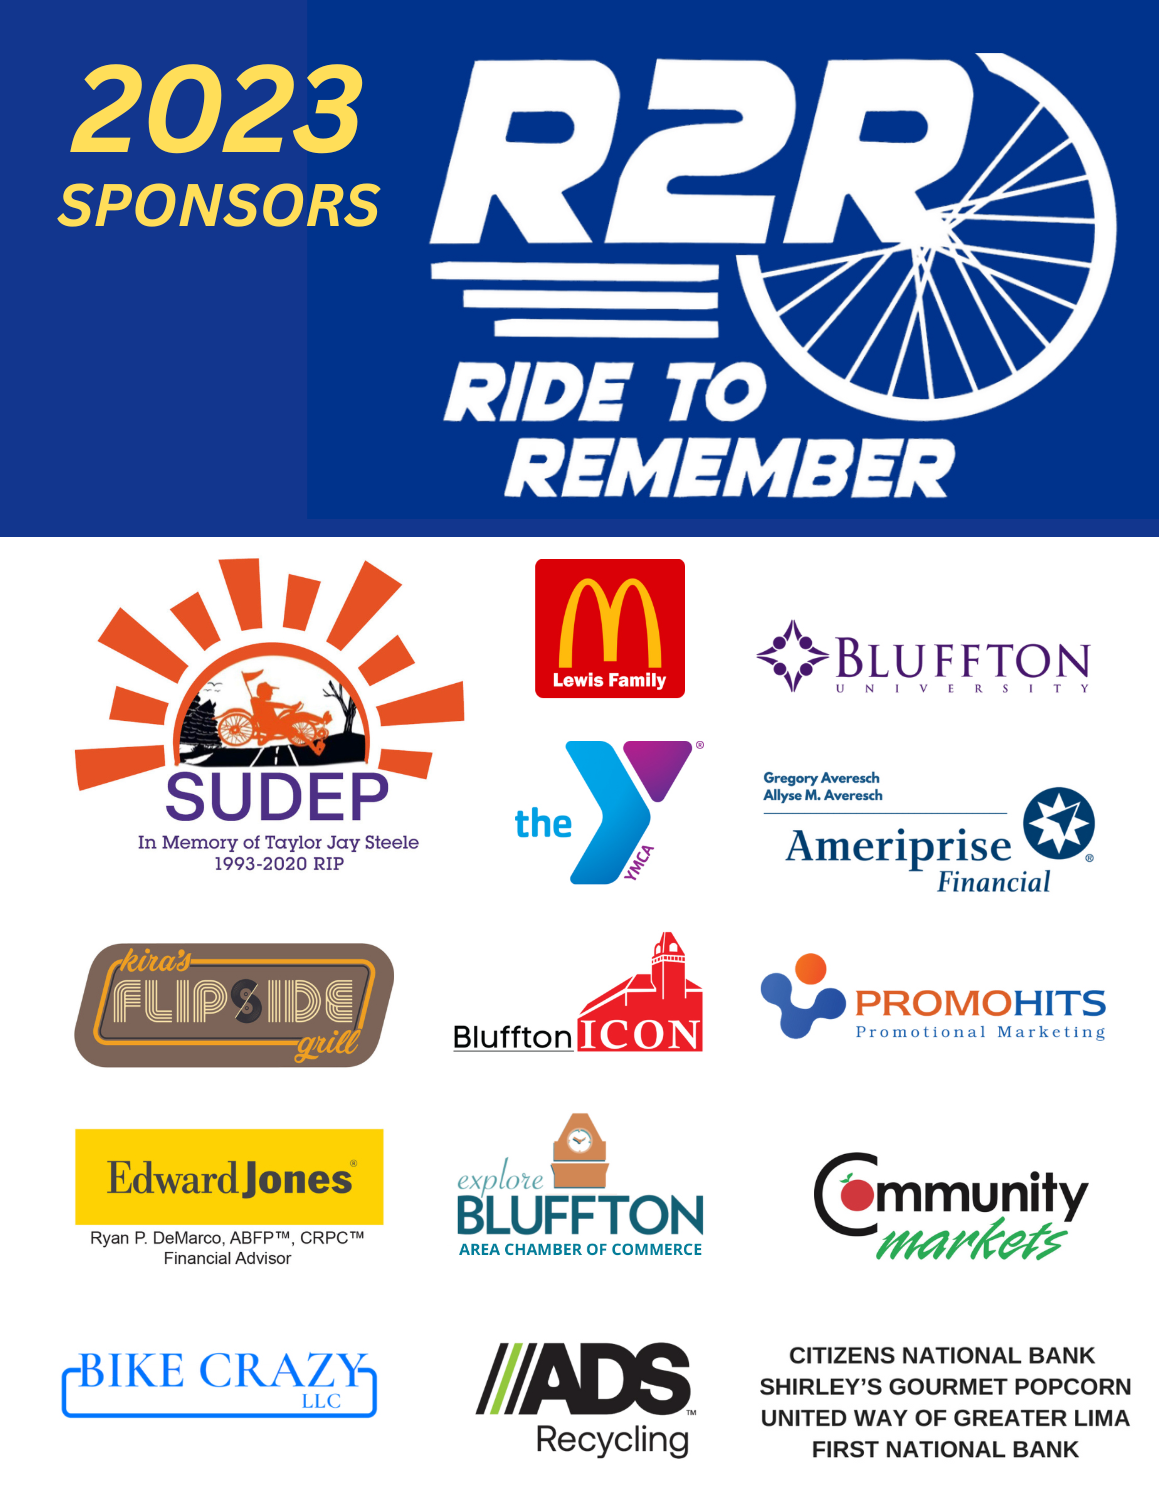 Ride to Remember registration, parking at new Snider Rd. location